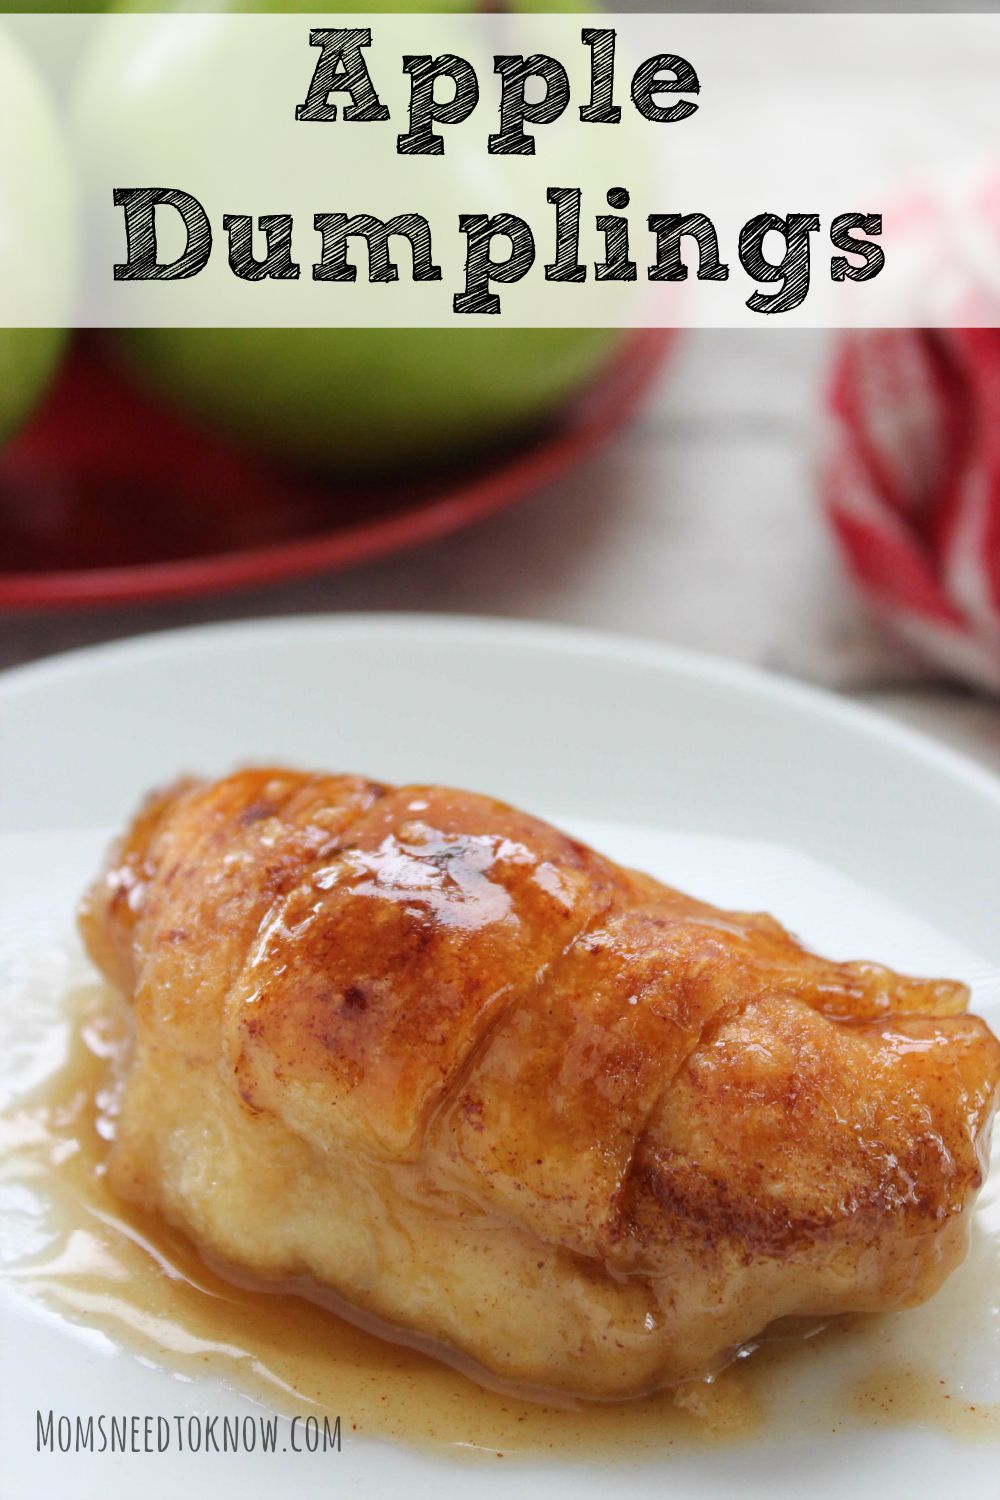 These homemade apple dumplings are so easy to make and will fill your home with the most amazing aroma. Serve them for breakfast or dessert!